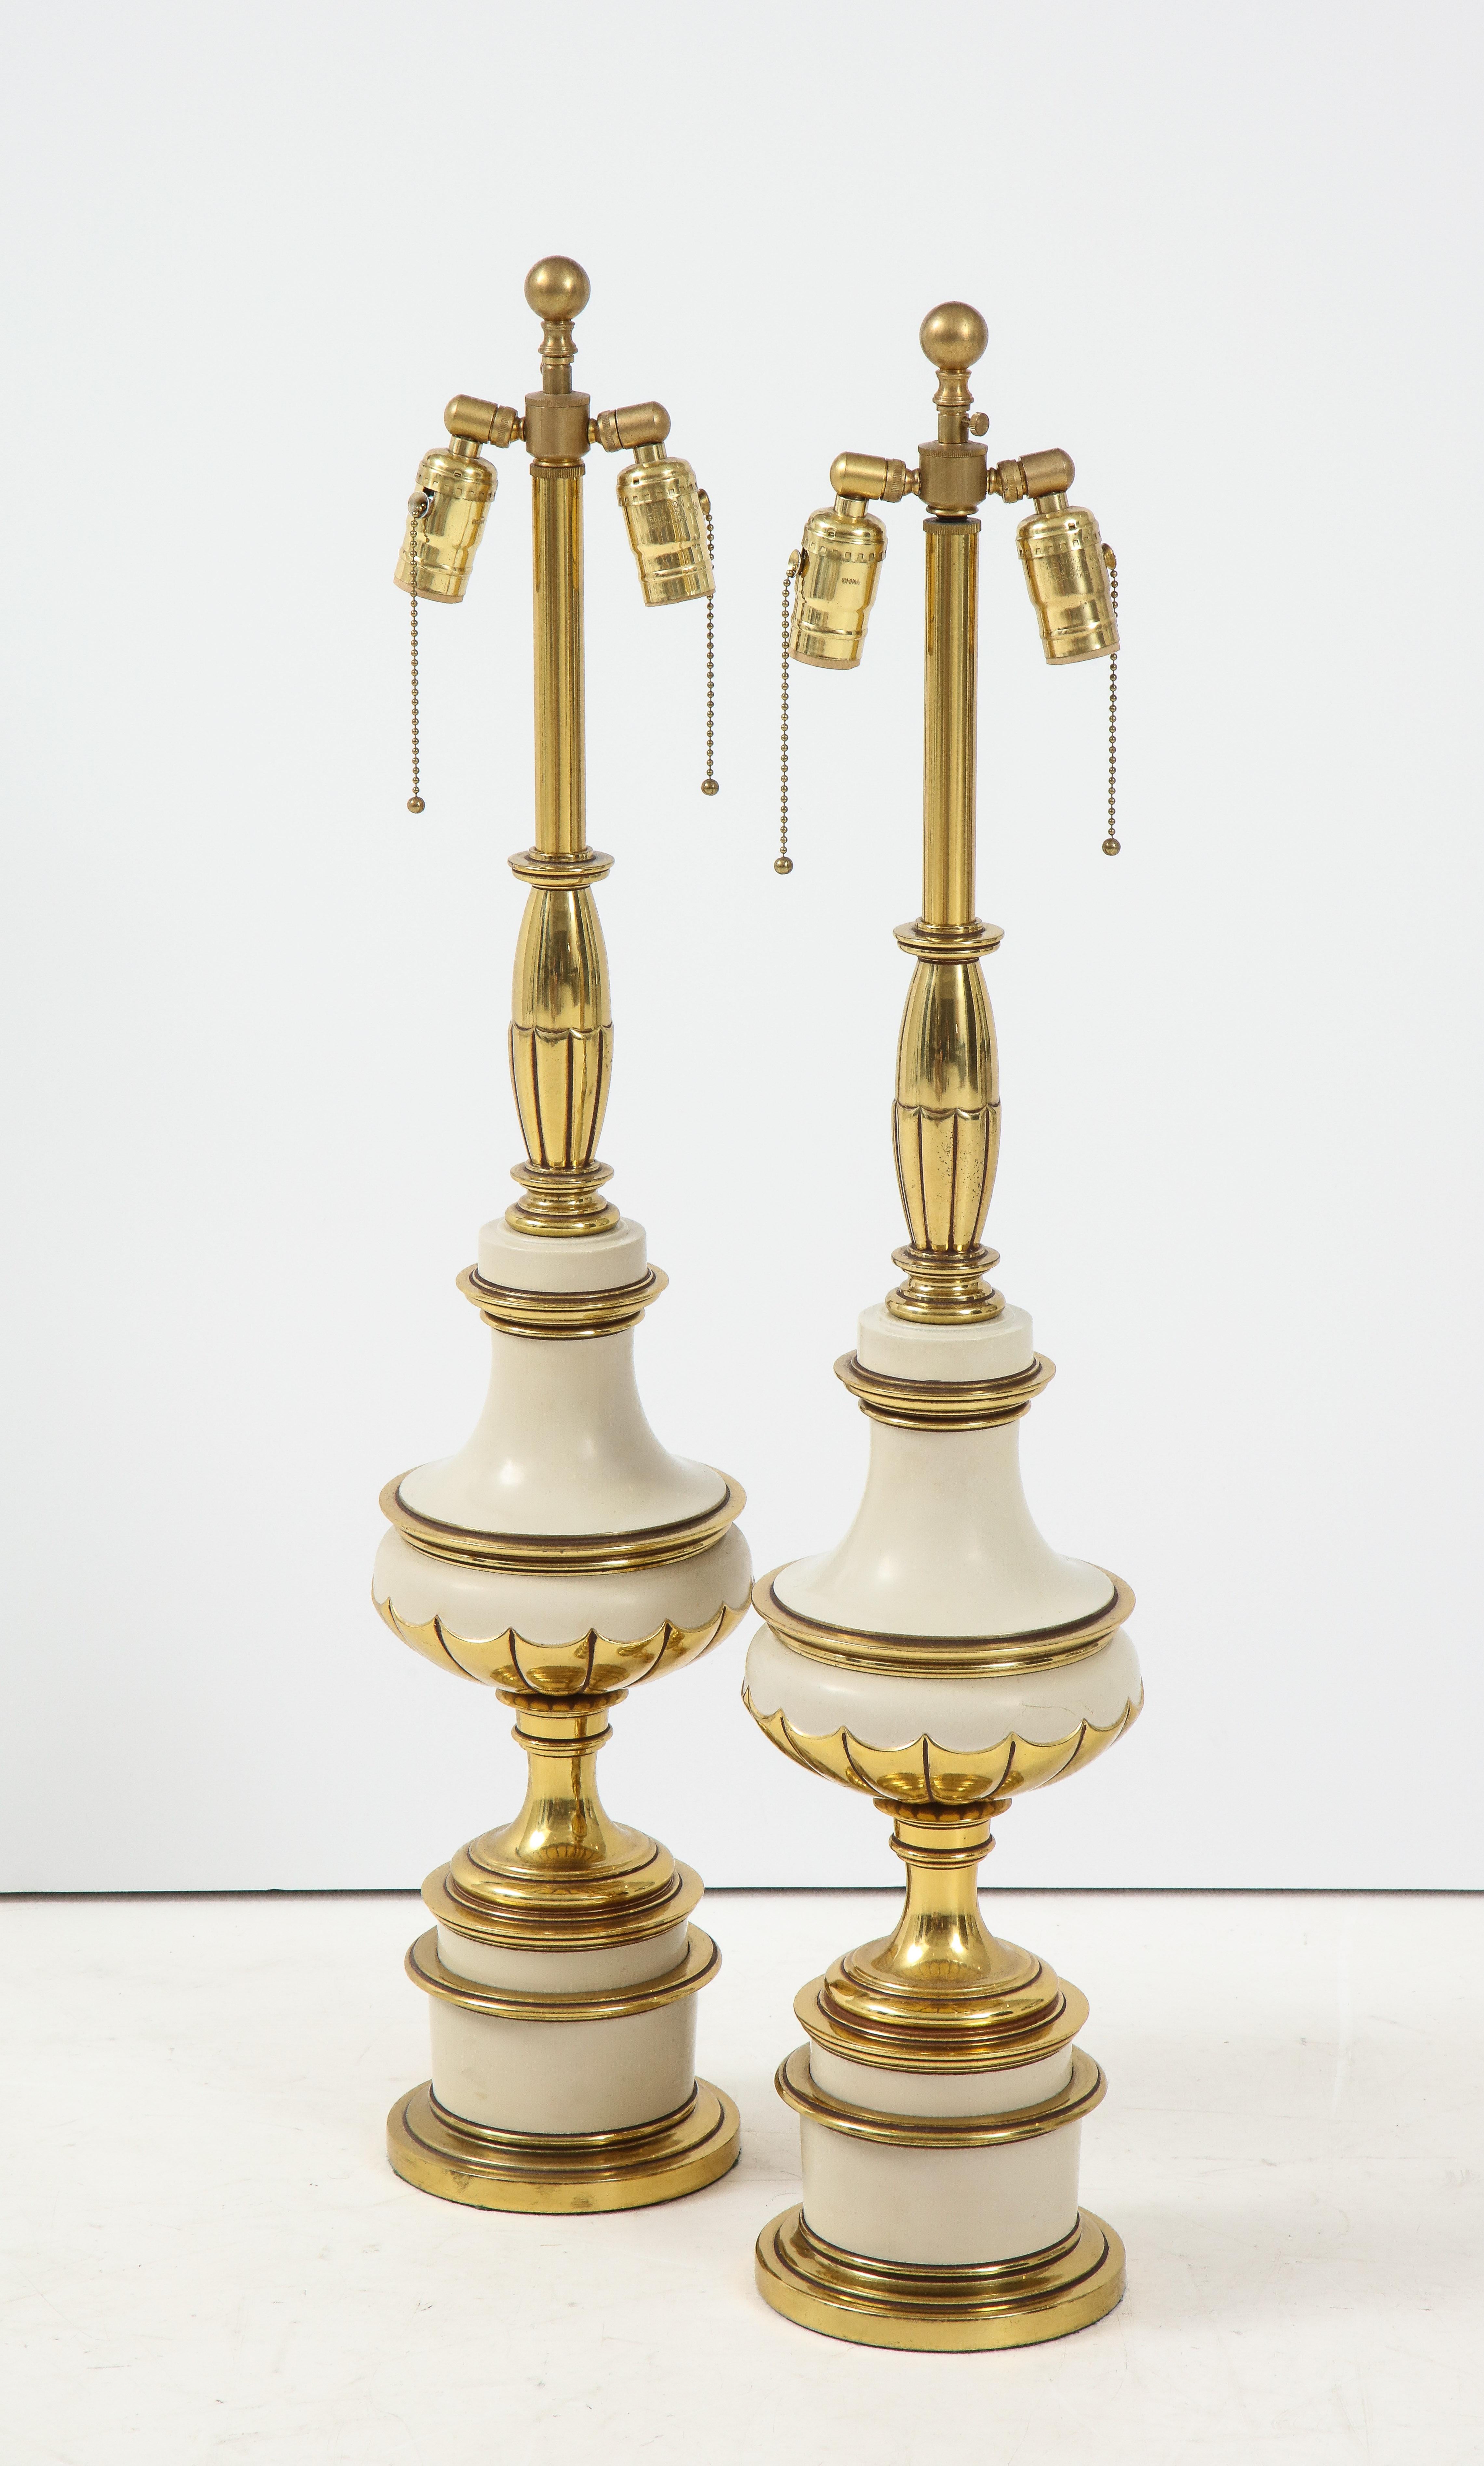 Exquisite pair of heavy construction Hollywood Regency taupe/mushroom colored enamel and brass lamps featuring double pull chain sockets. Rewired for use in USA, 100W max bulbs.